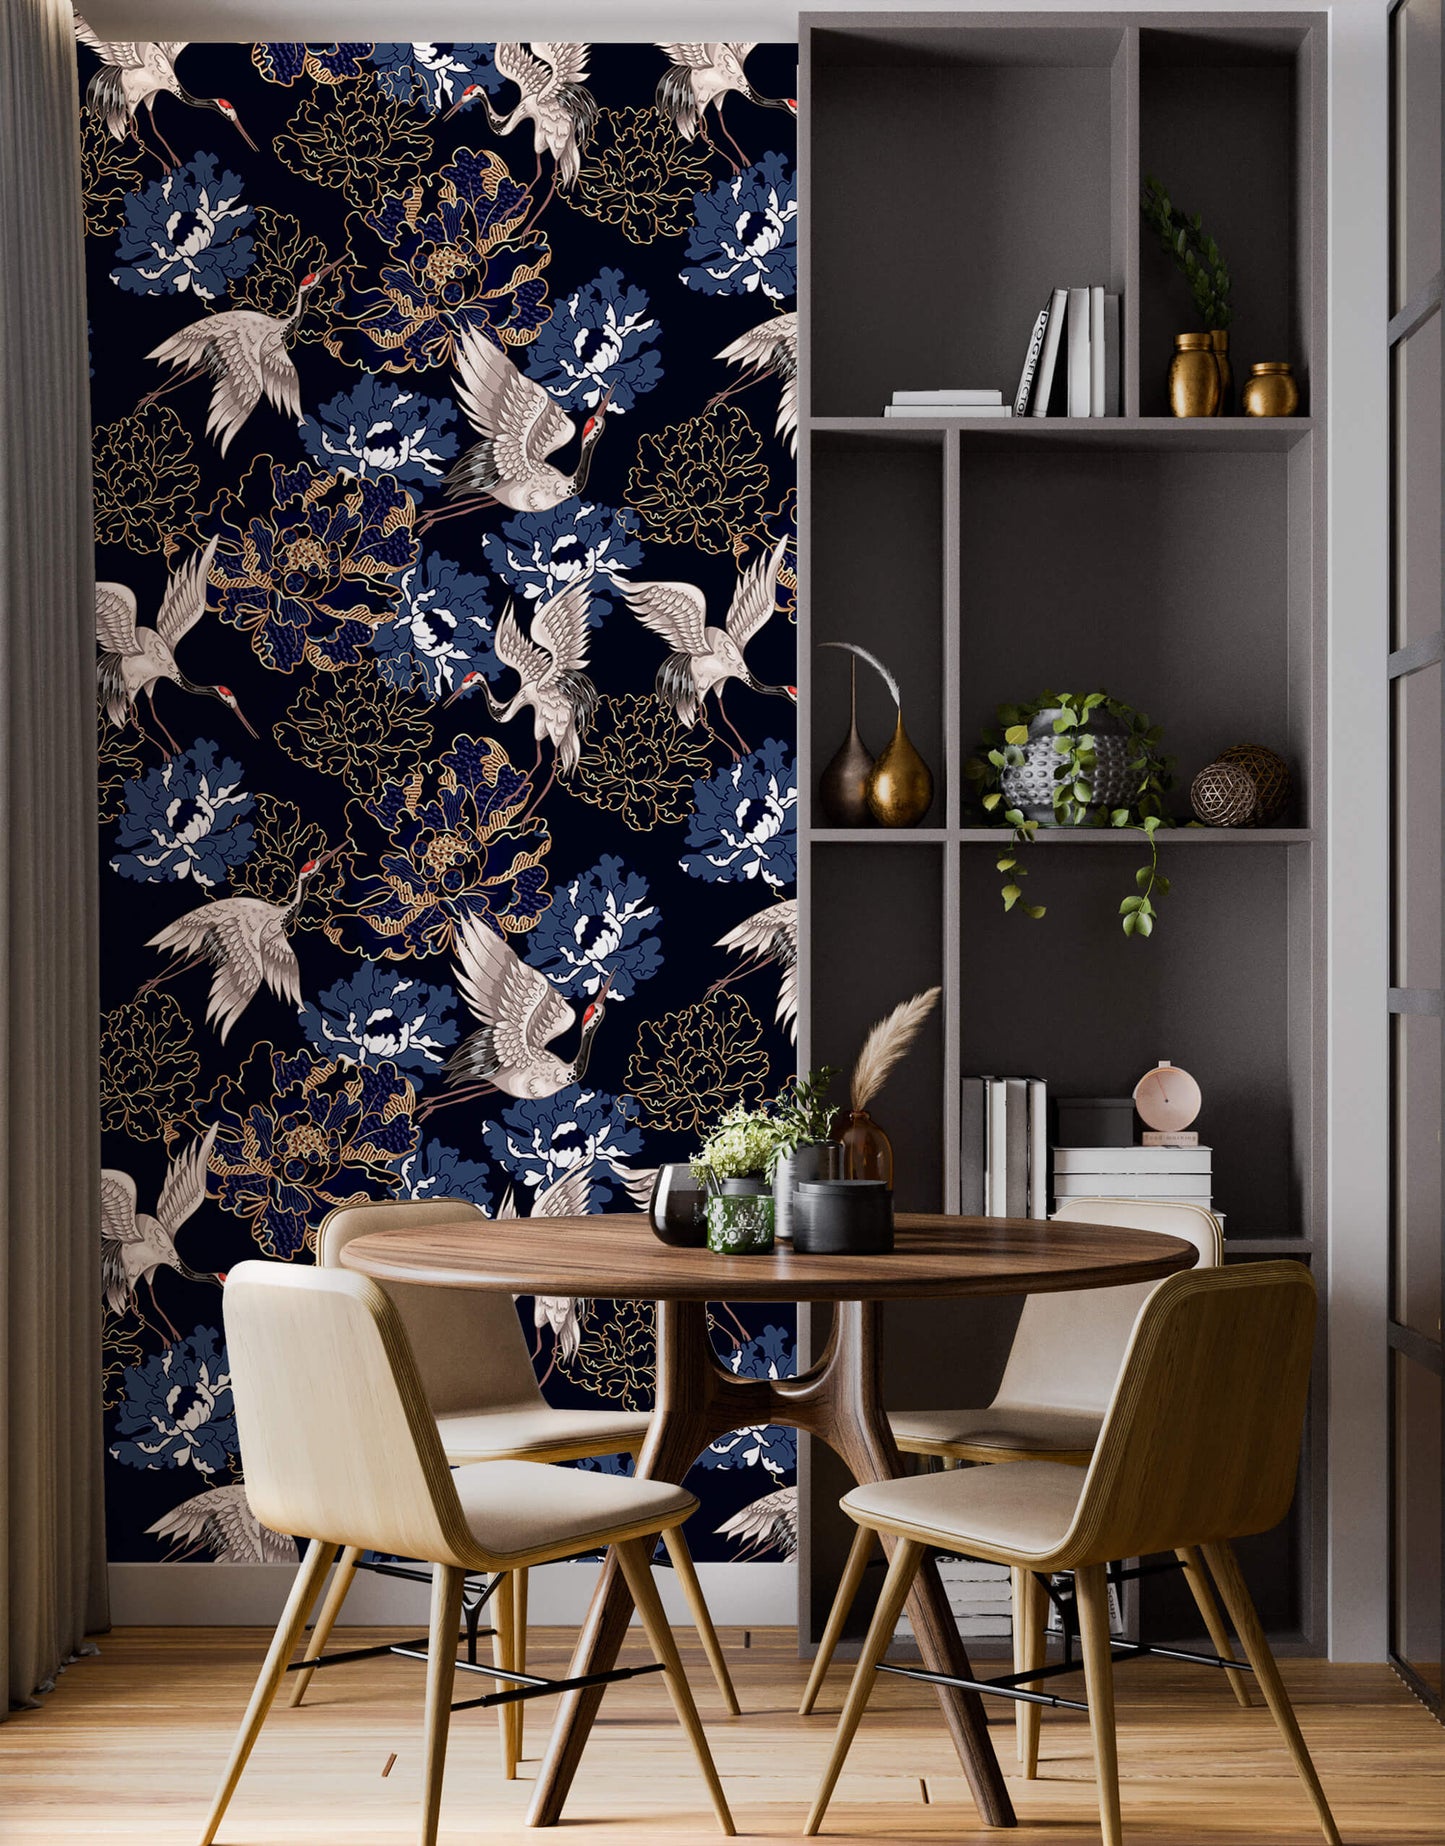 Golden Crane Flight Wallpaper: Elevate your space with the grace of nature's beauty depicted in this stunning design, featuring majestic cranes in flight against a backdrop of golden hues, creating an aura of elegance and tranquility.